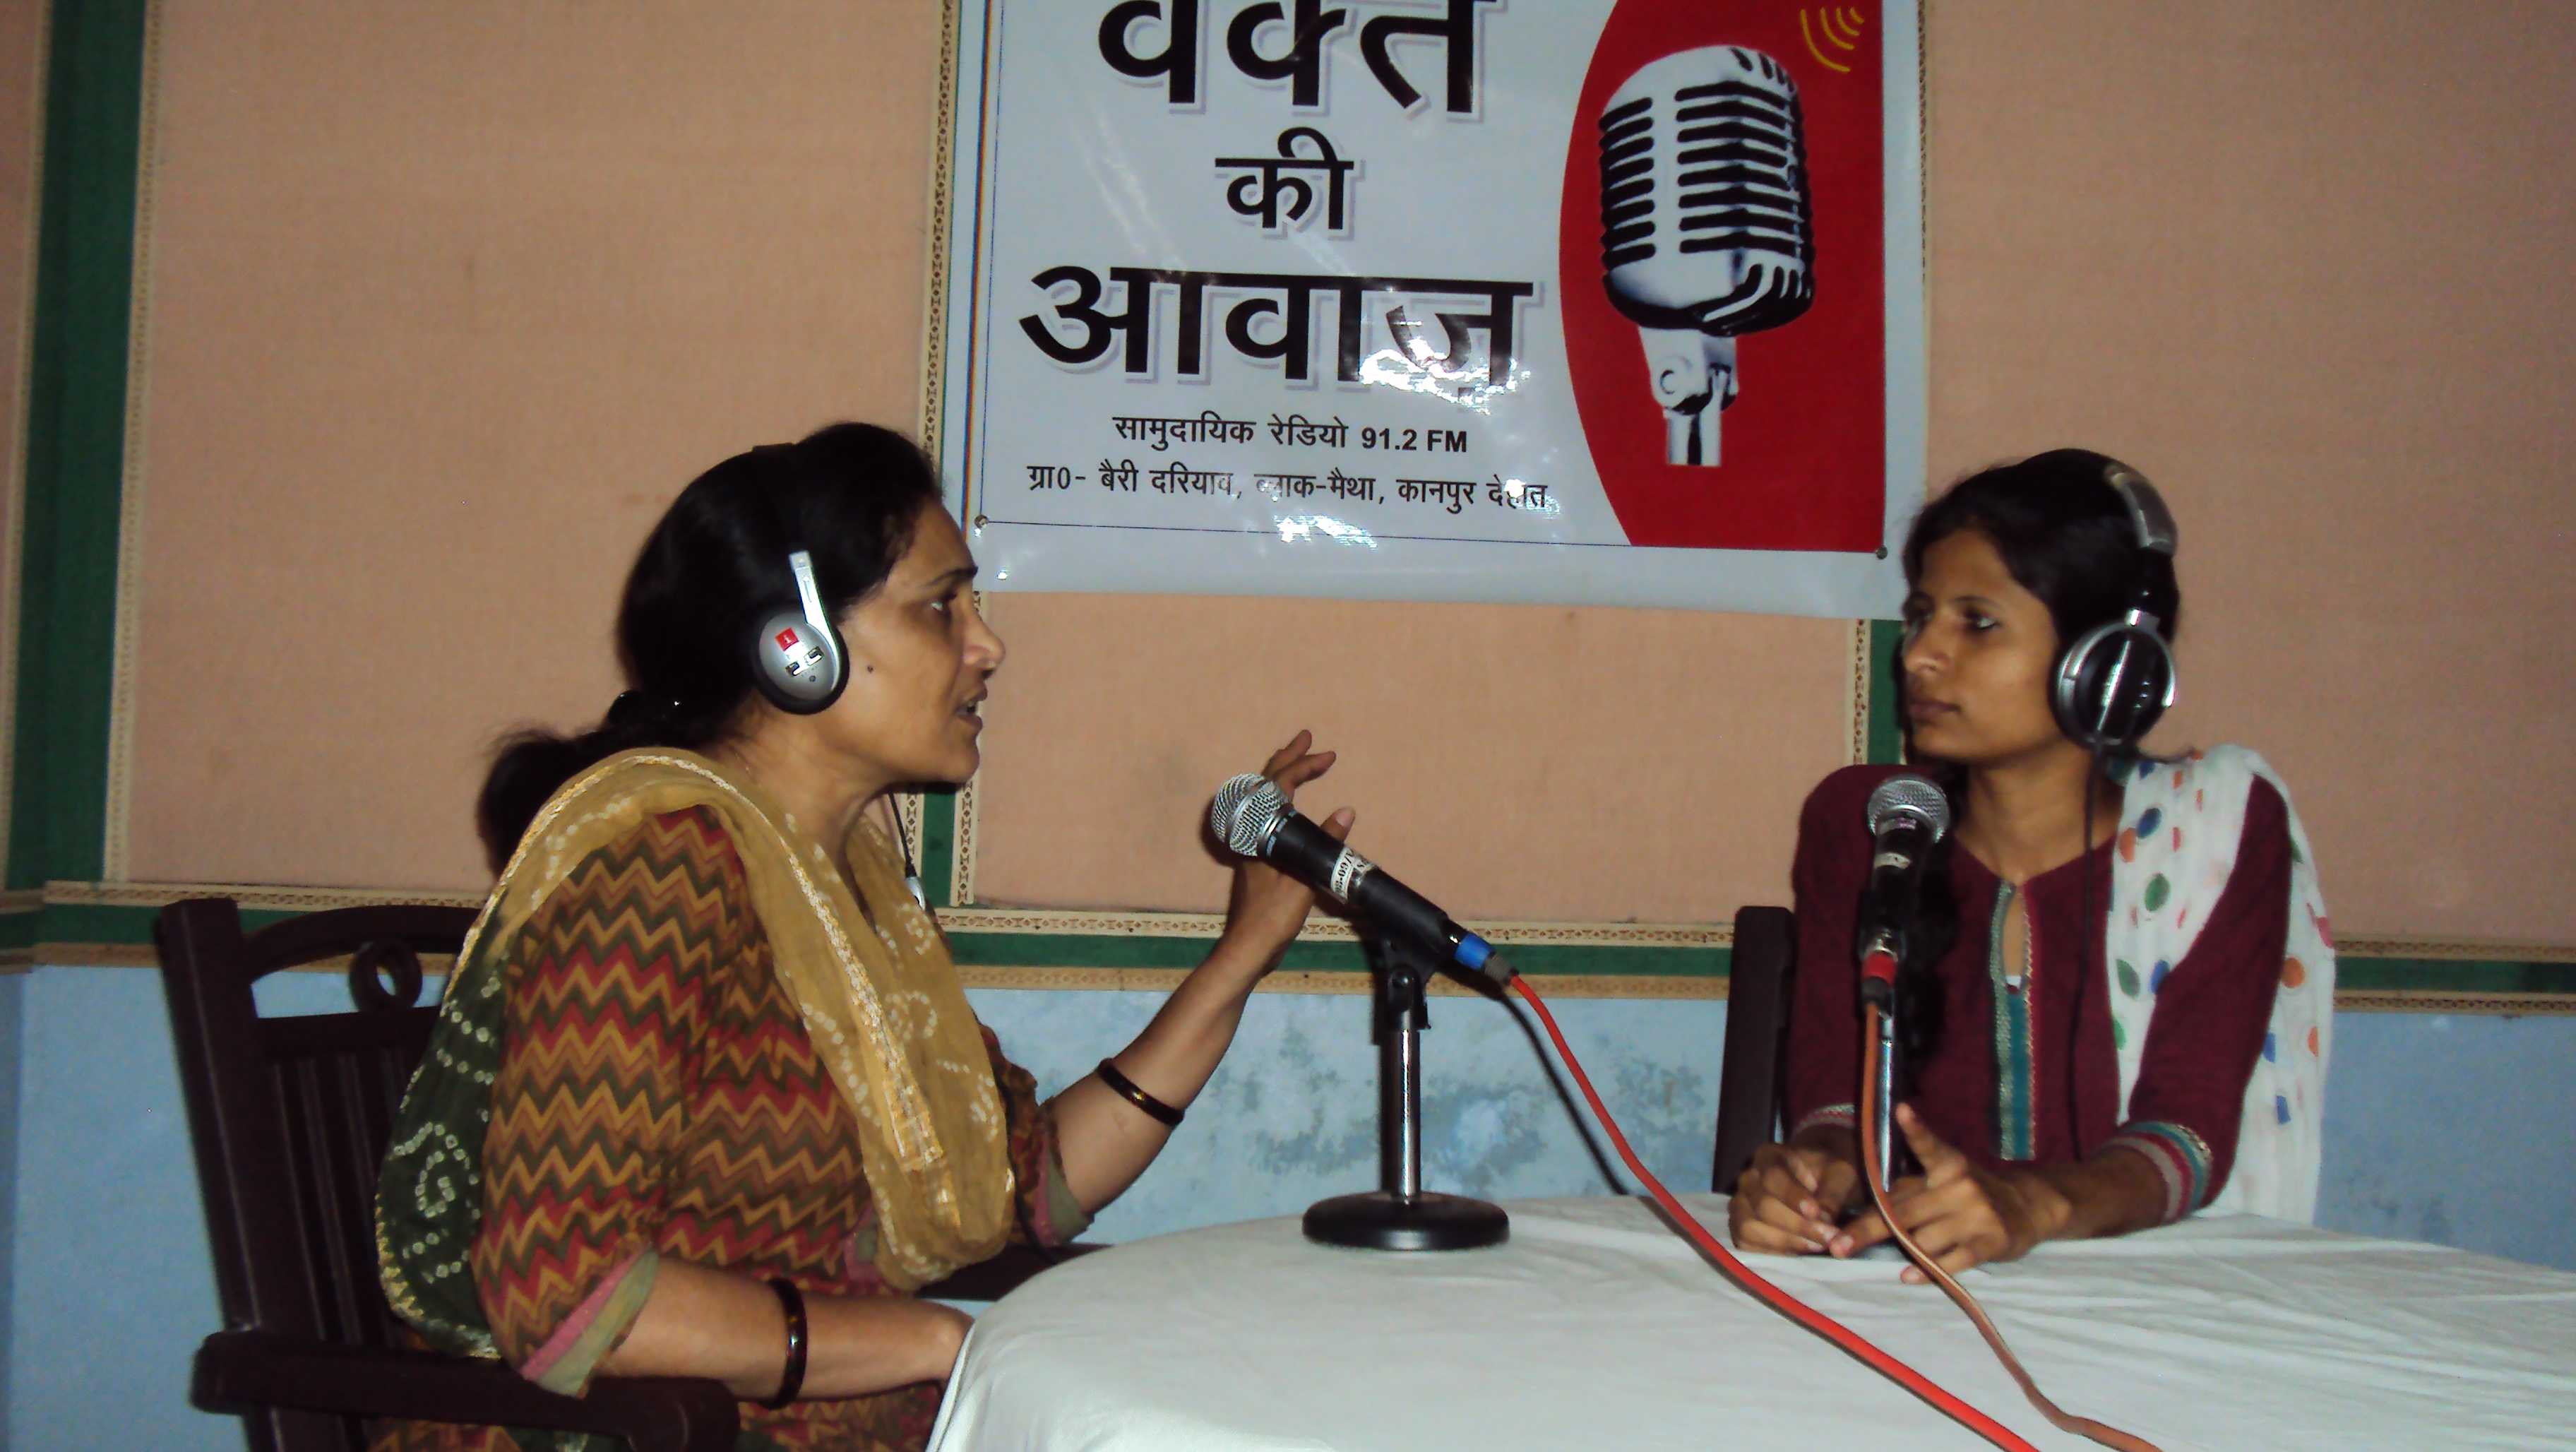 Radha Shukla (left) is the station manager of Waqt Ki Awaaz, which broadcasts programmes in Awadhi language to 300 villages in the Kanpur Dehat district in Uttar Pradesh. (Courtesy: Sharamik Bharti)